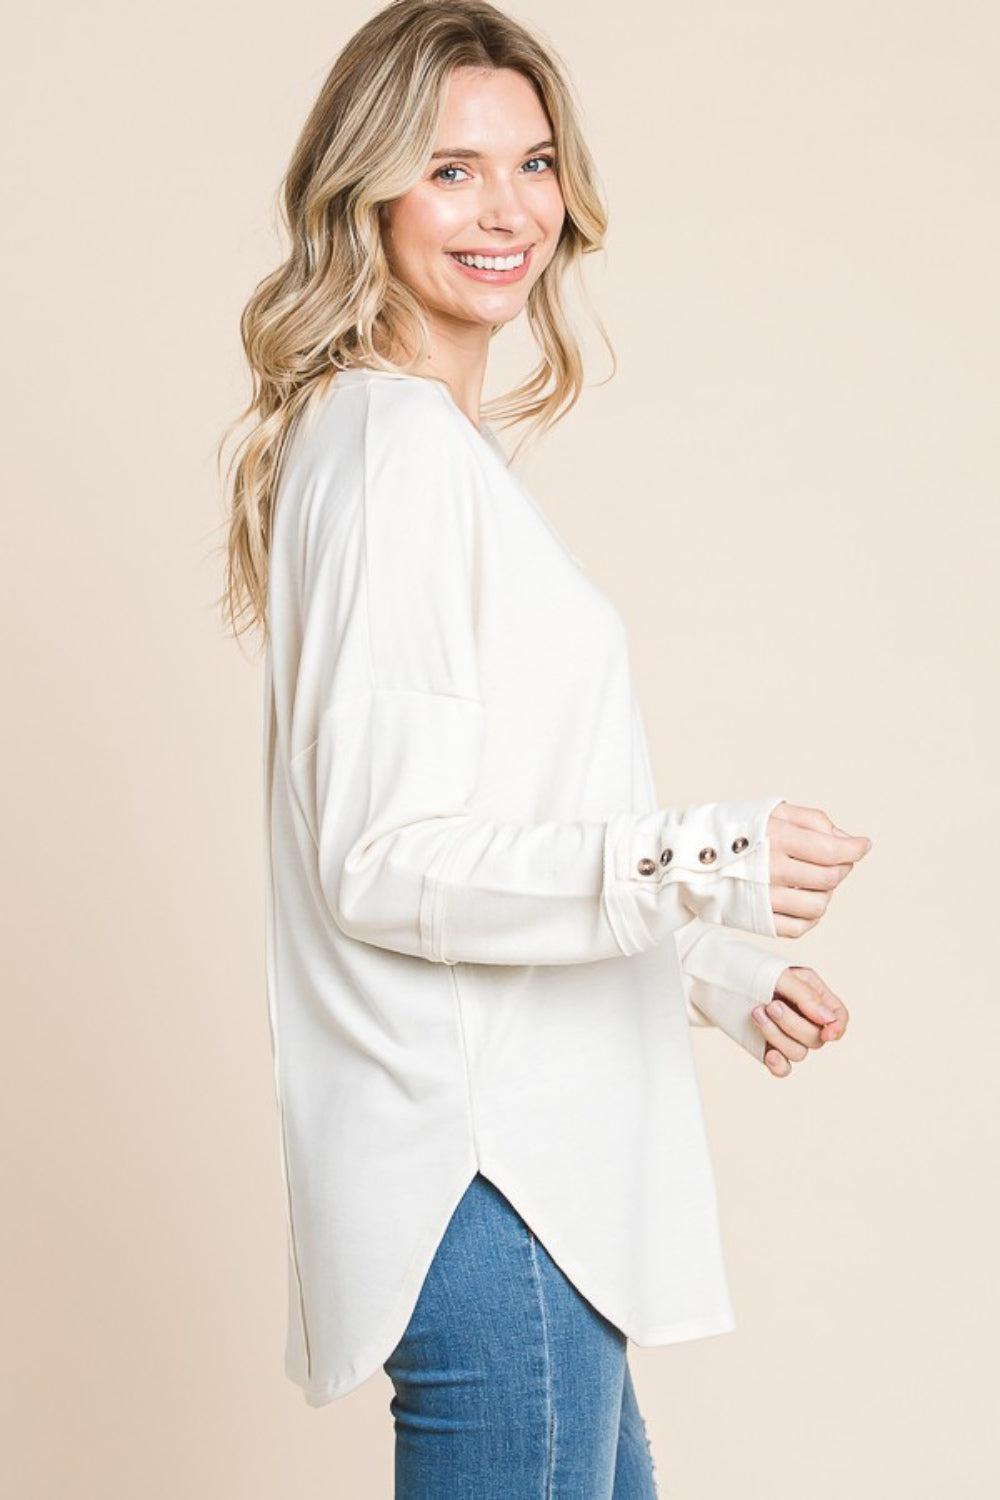 a woman wearing a white top and jeans